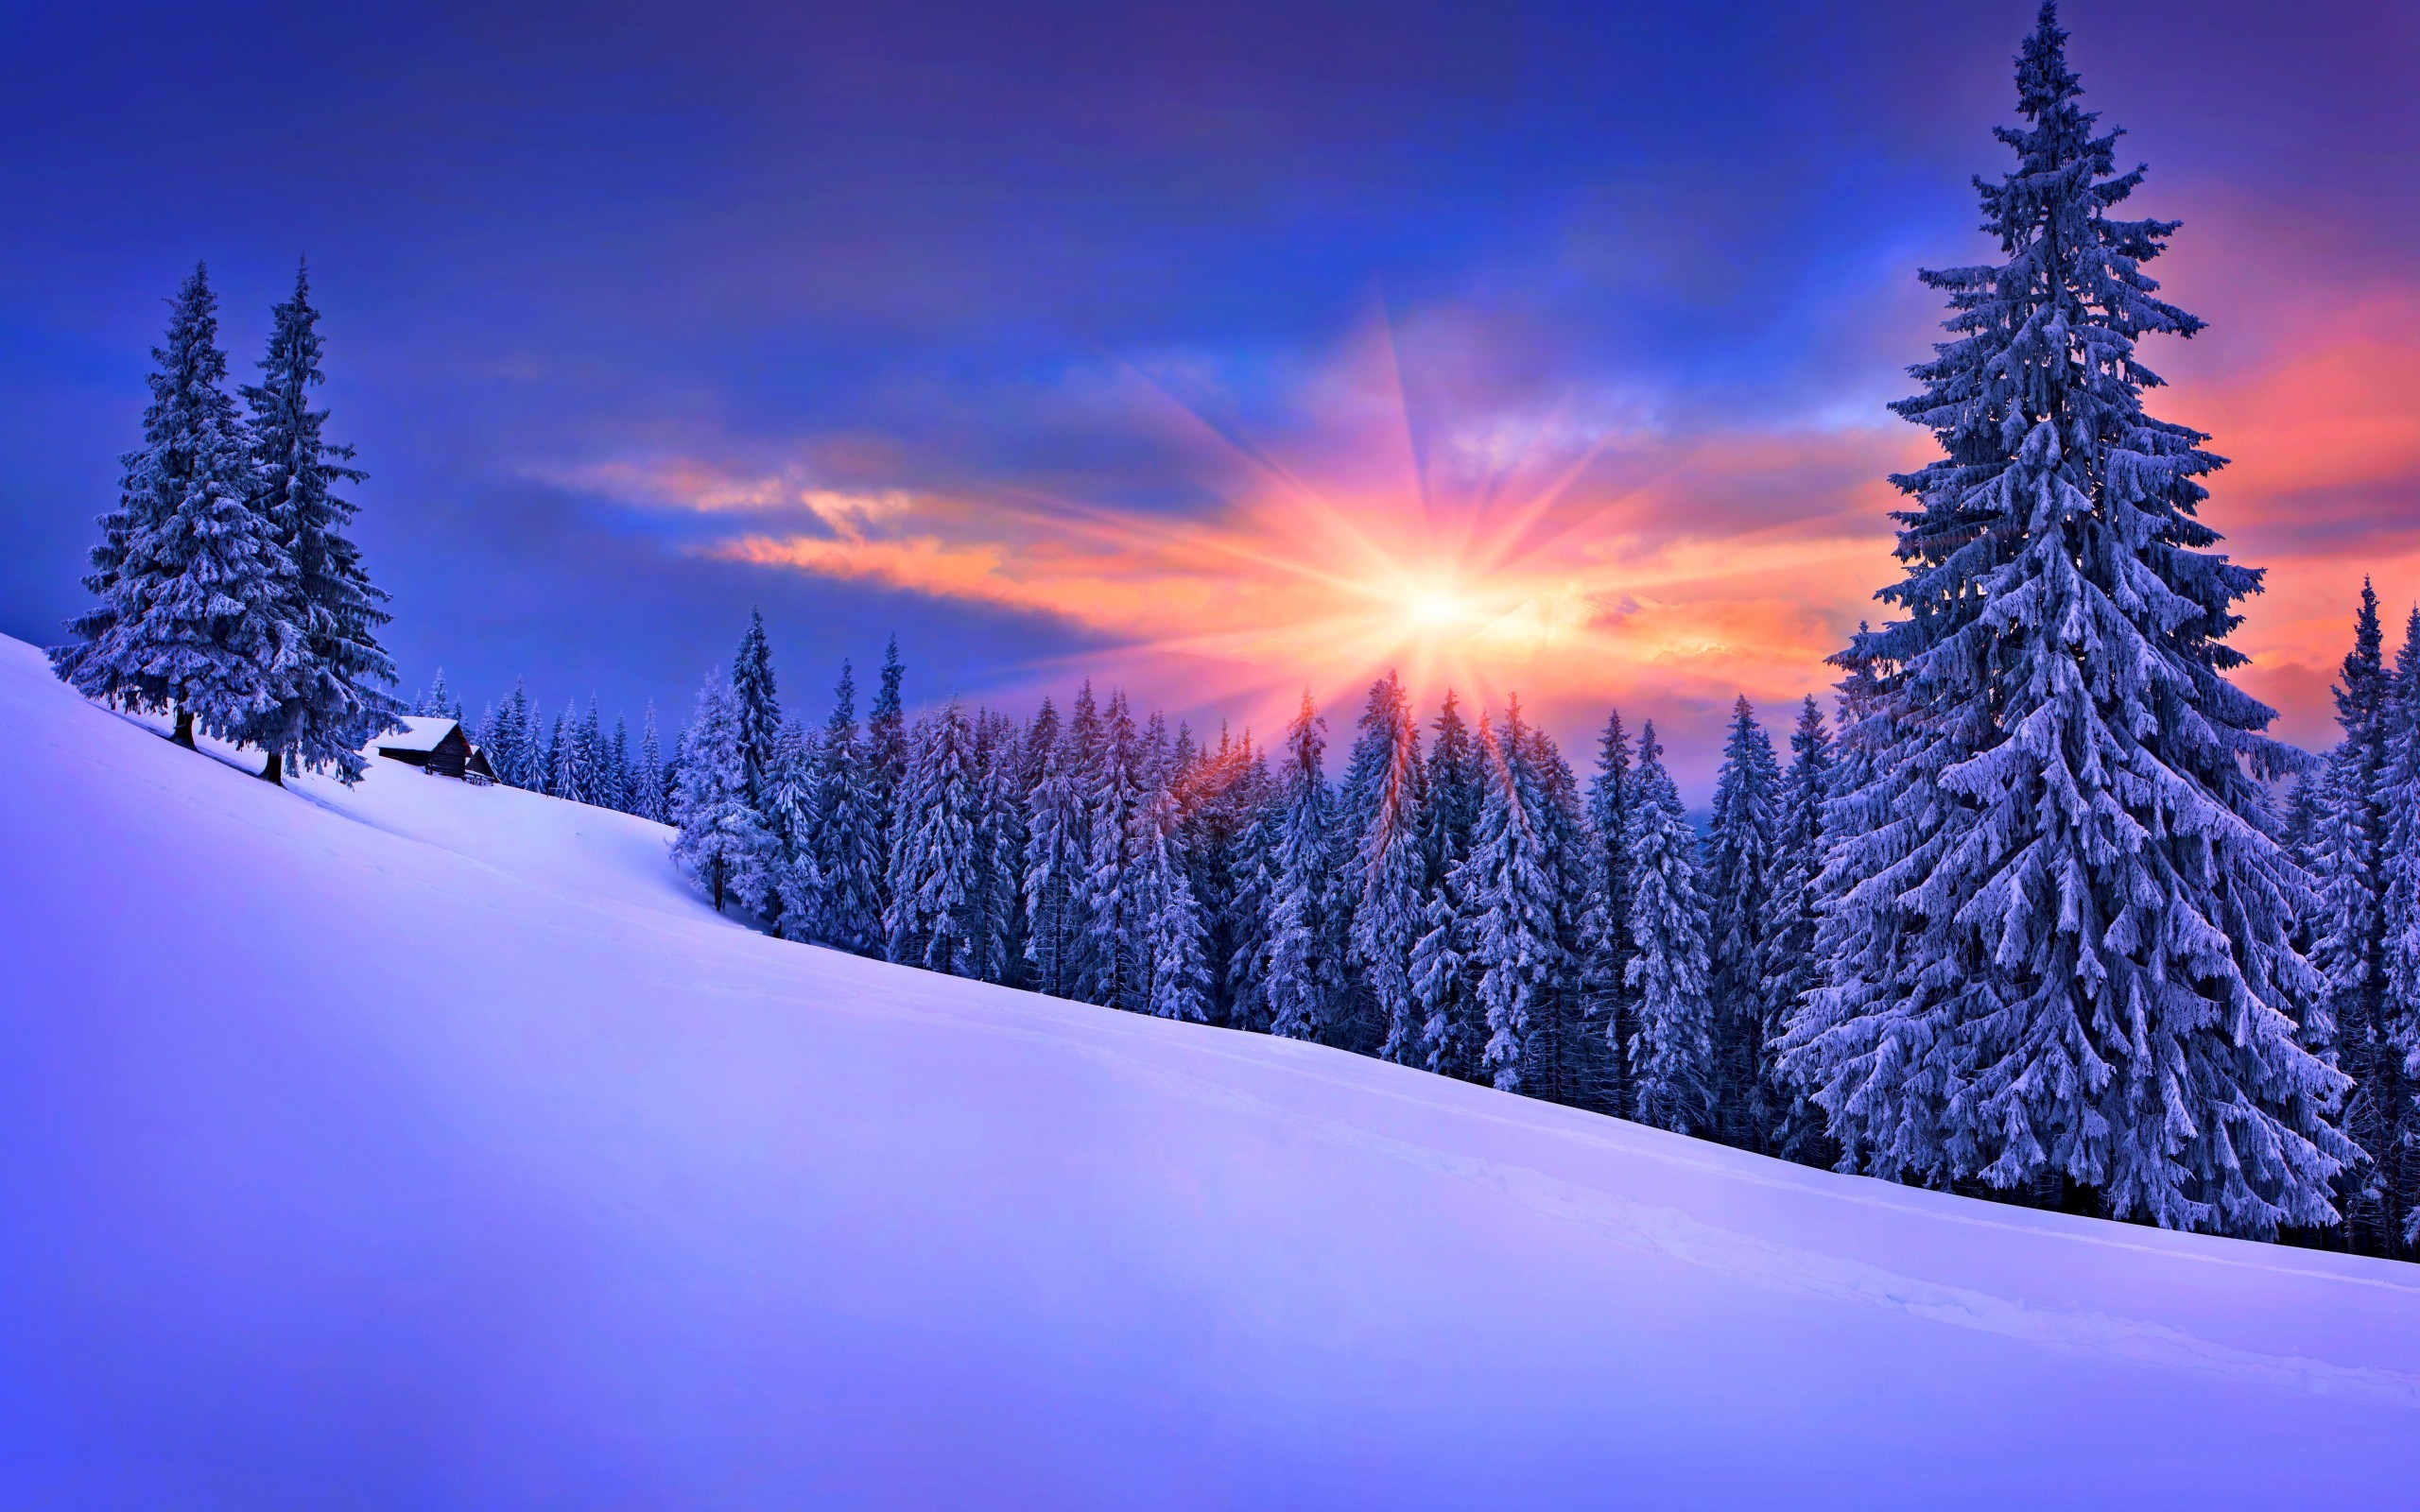 General 2560x1600 forest winter snow landscape pine trees nature trees sky sunlight cold outdoors